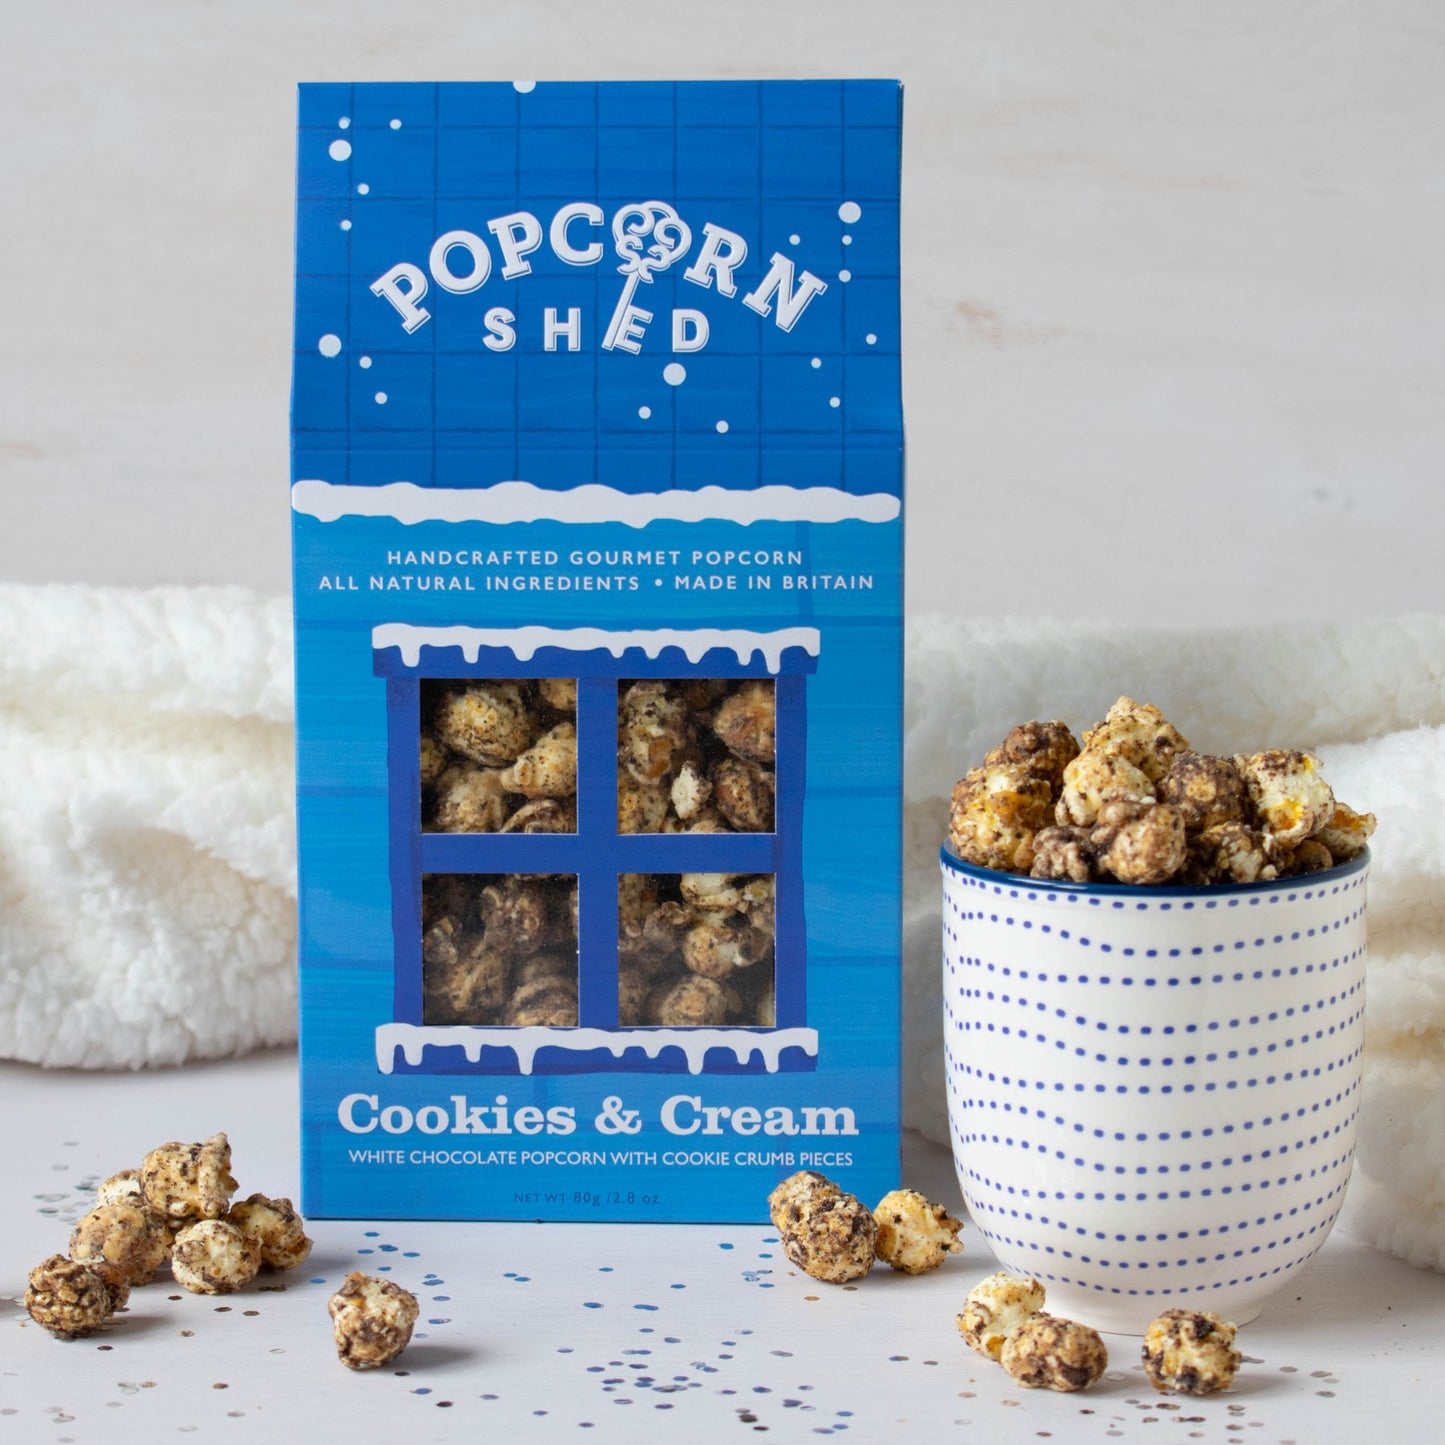 Popcorn Shed Cookies & Cream Popcorn Shed (80g)